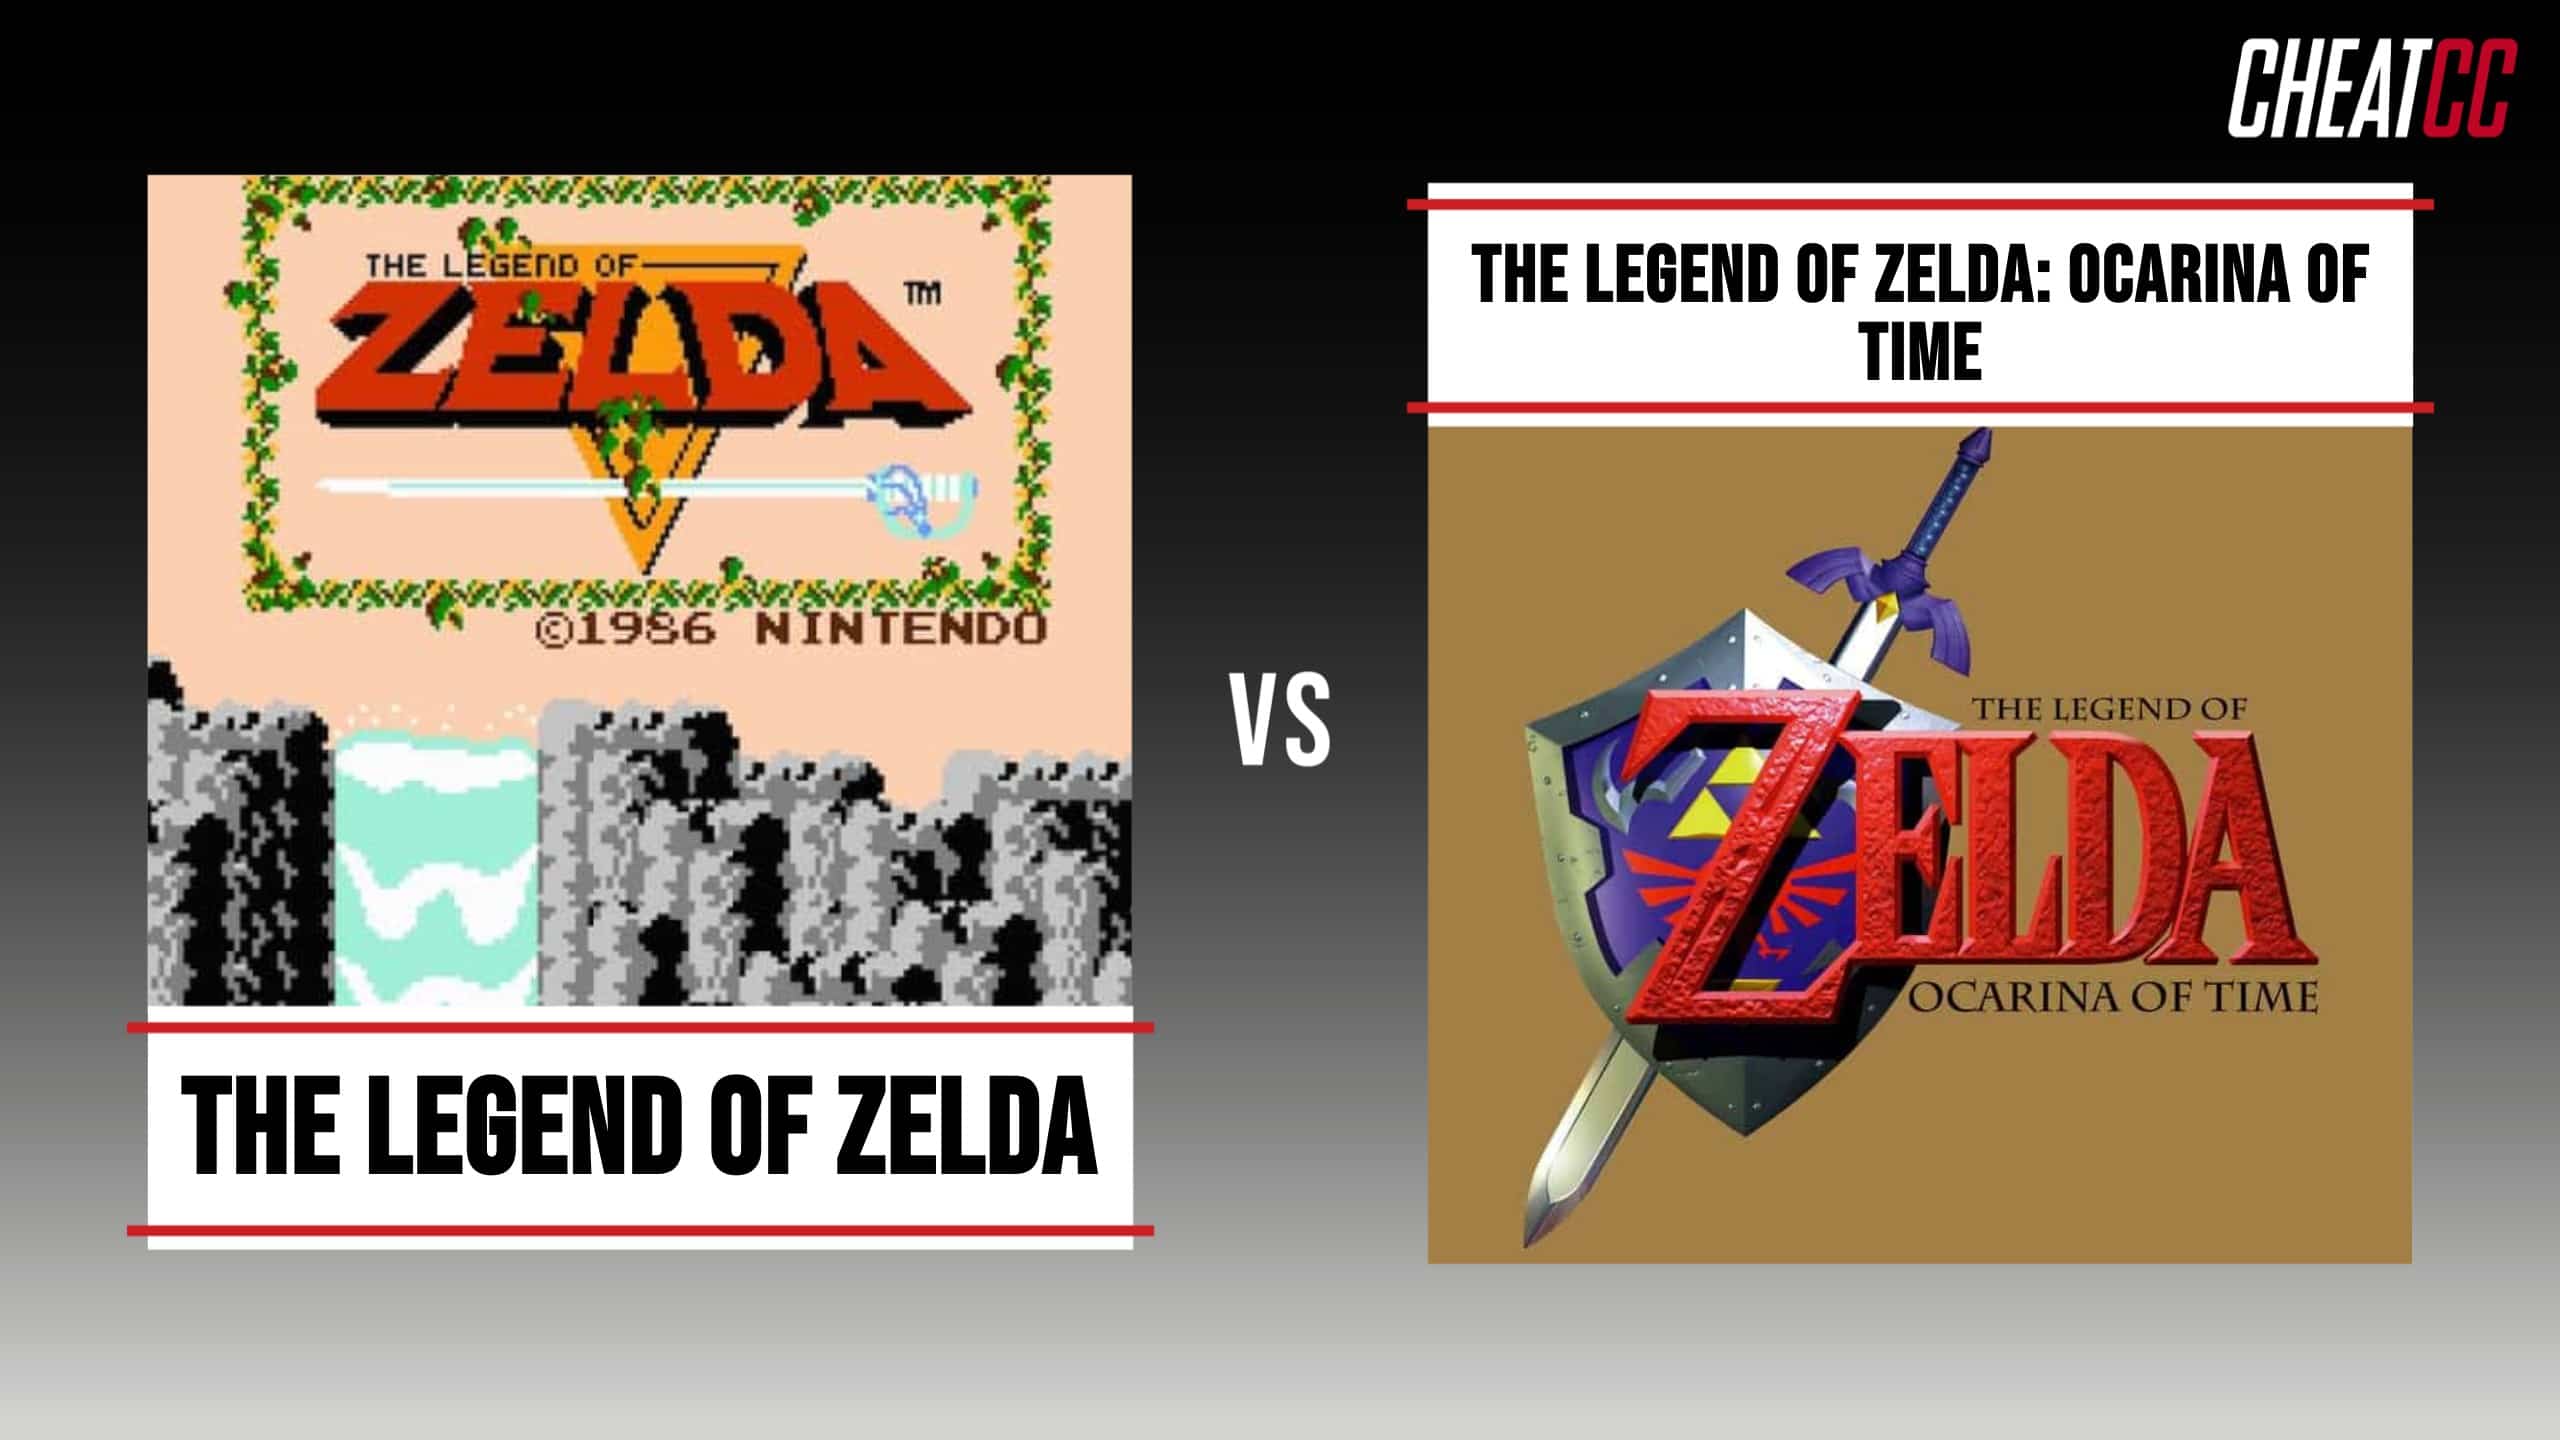 How The Wind Waker Has Influenced Zelda For 20 Years